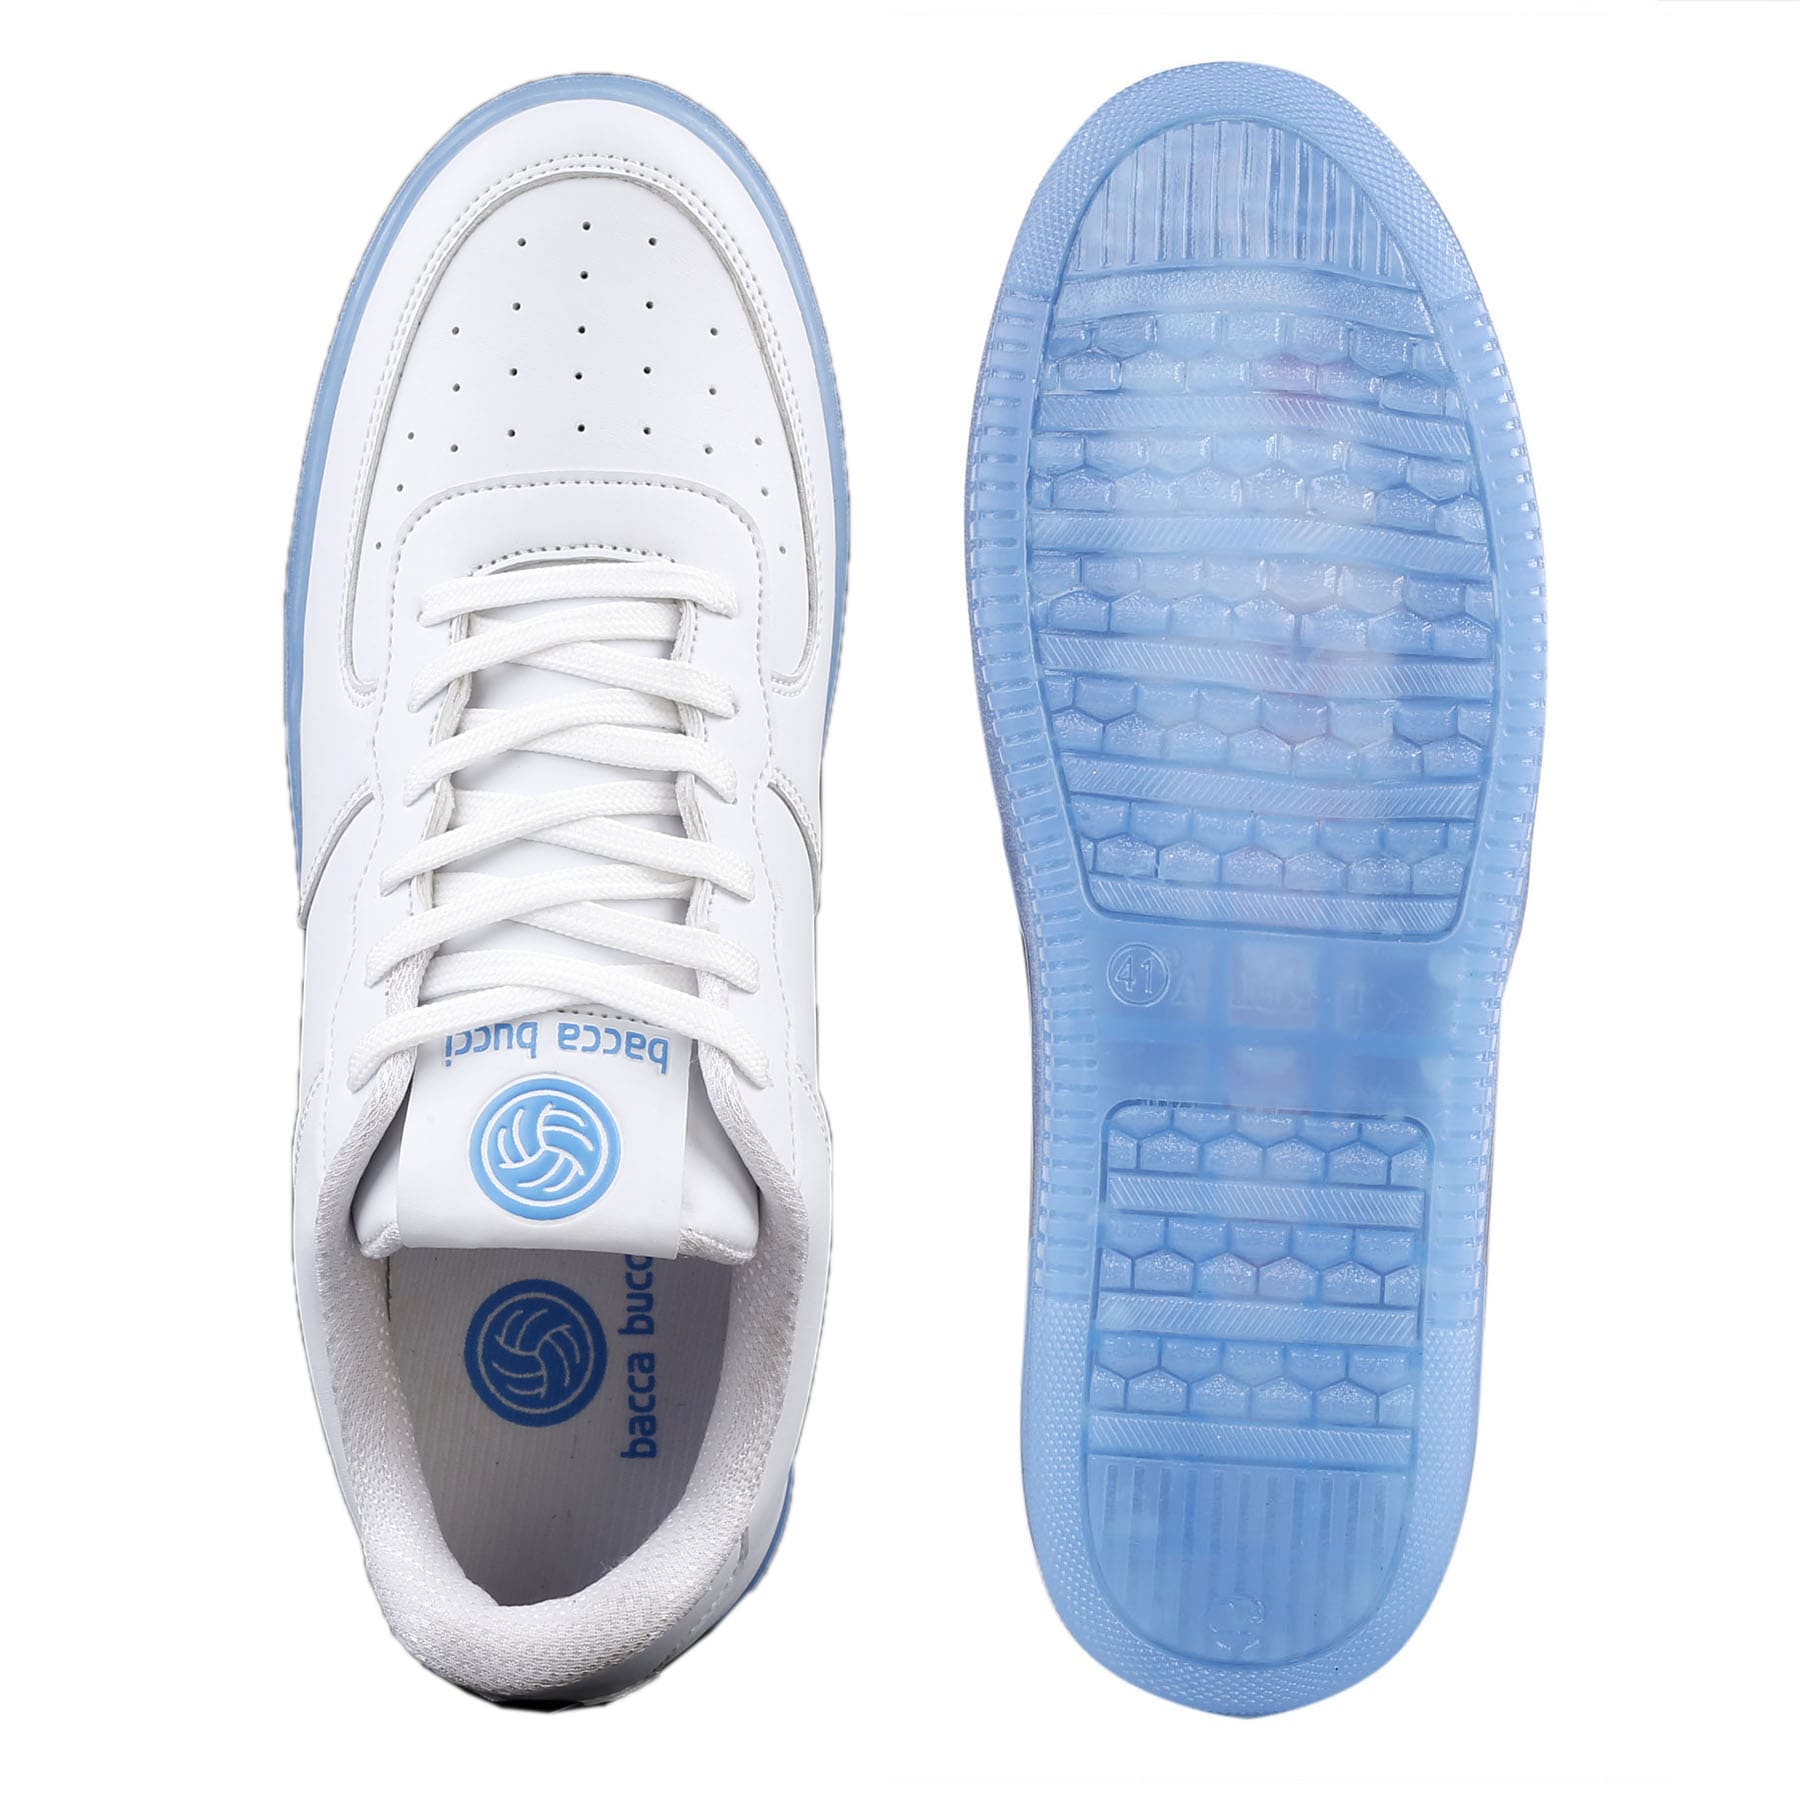 Bacca Bucci ICE Men's Flat Sole Sneakers with Translucent Rubber Out Sole- All Day Wear